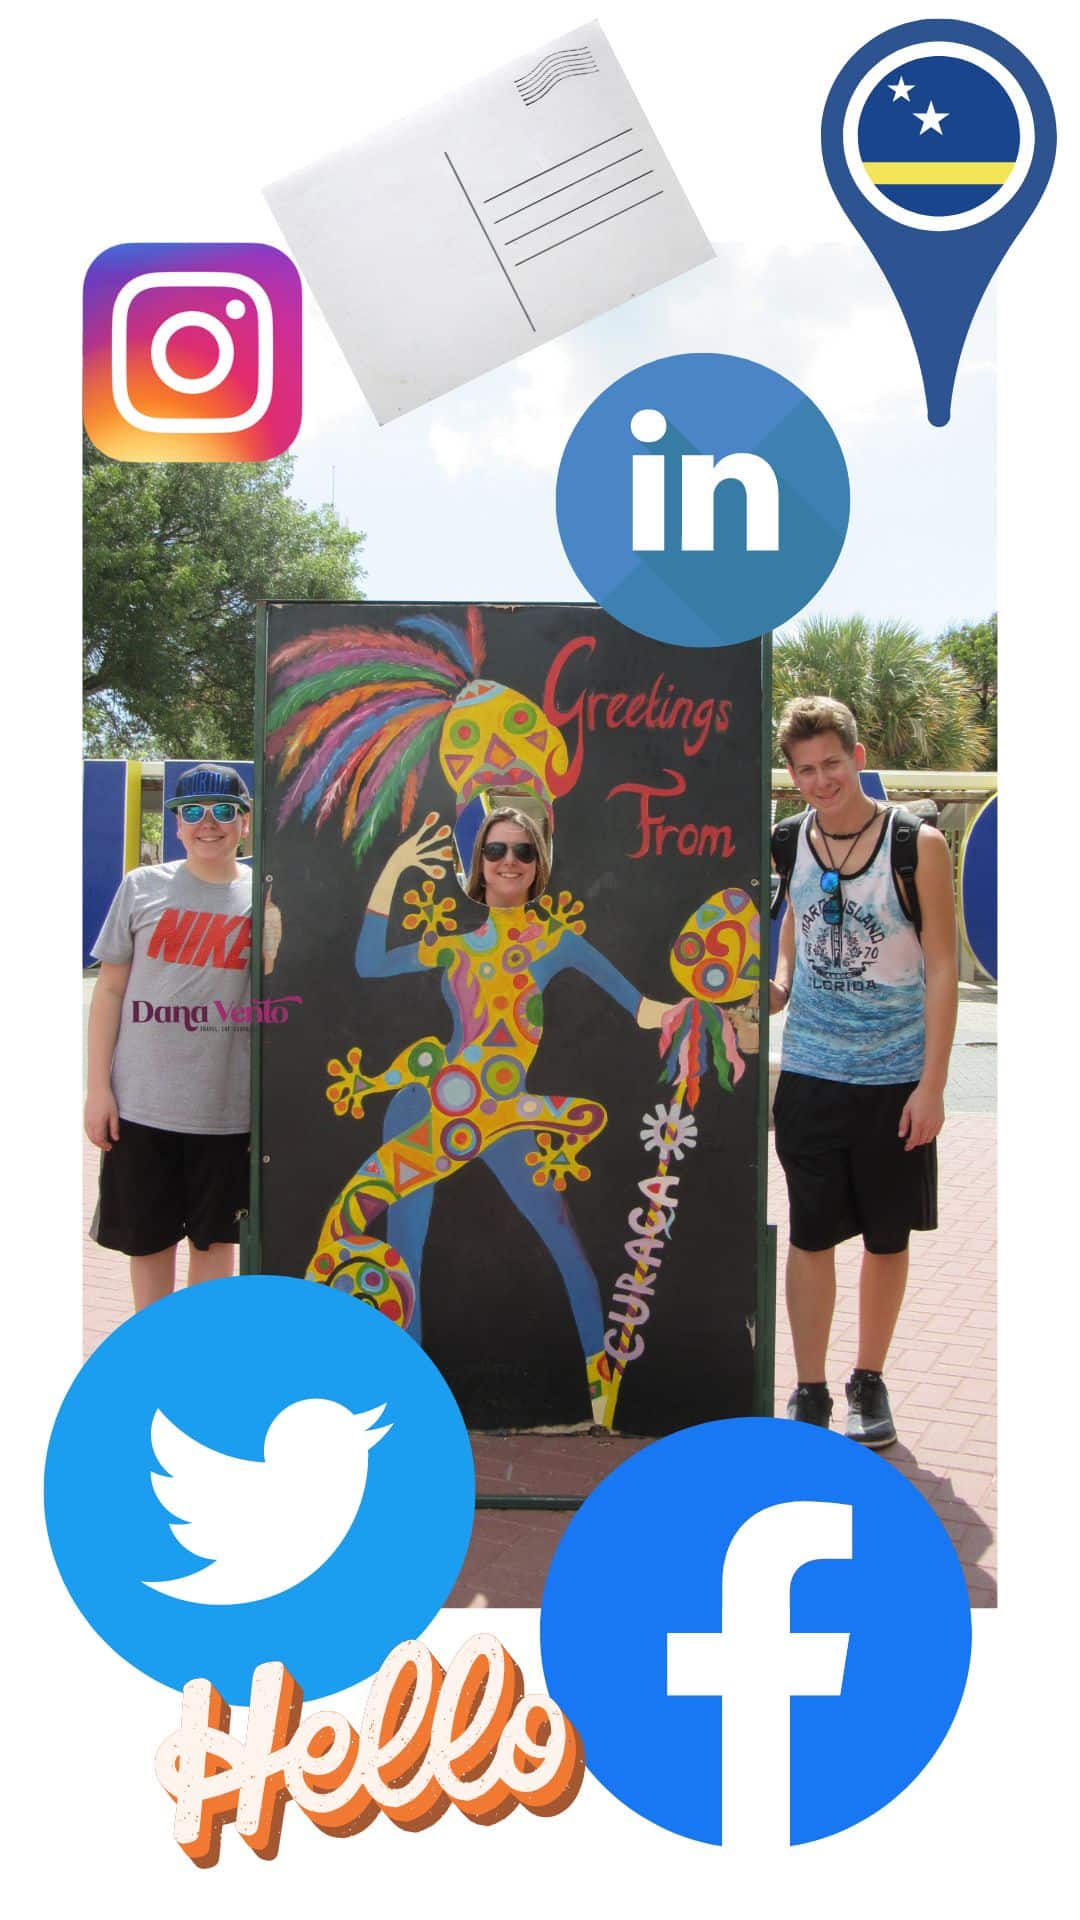 Discover Willemstad Curacao on Foot - Send Social Media Greetings from This Larger than-life greeting card in the heart of Punda before entering Queen Wilhelmina Park